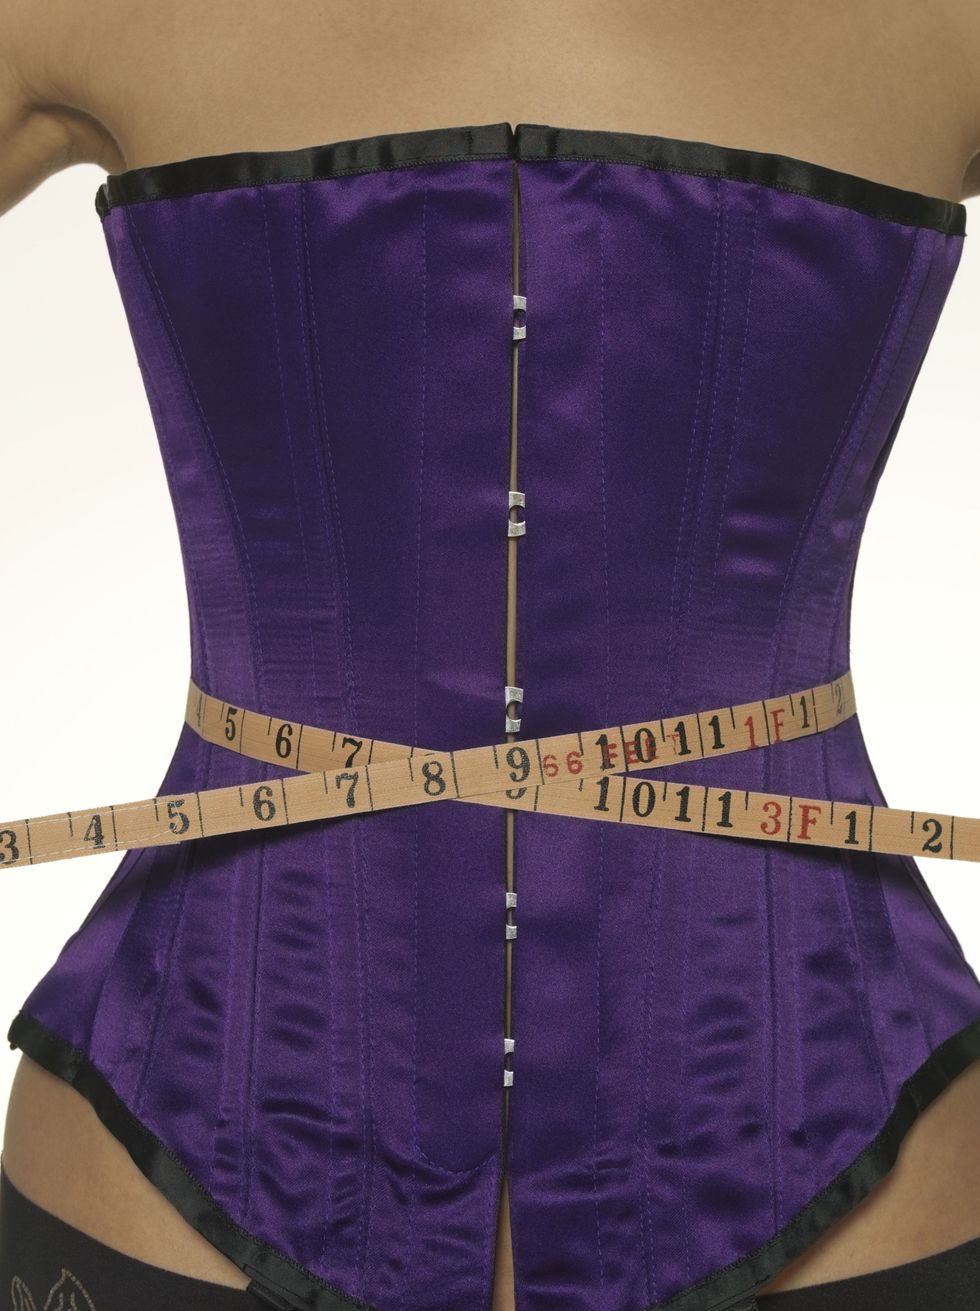 The Science of Sweat Wearing: How the Right Weight Loss Strategy Can H –  Slim Tight Waist Co.